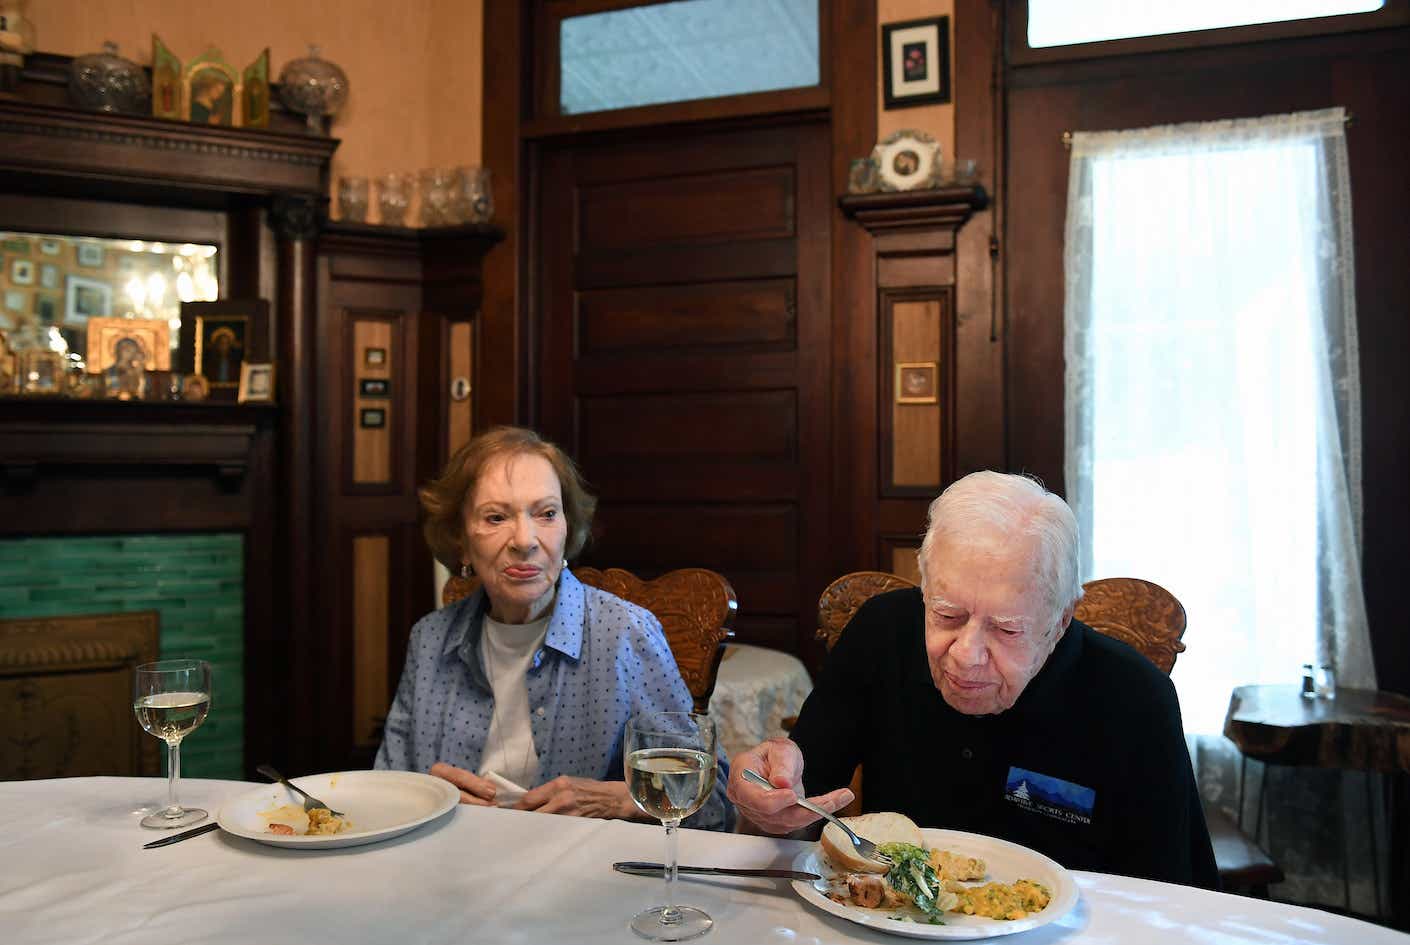 Former President of the United States, Jimmy Carter sits next to his wife, former First Lady, Rosalynn Carter while having dinner at the home of friend, Jill Stuckey